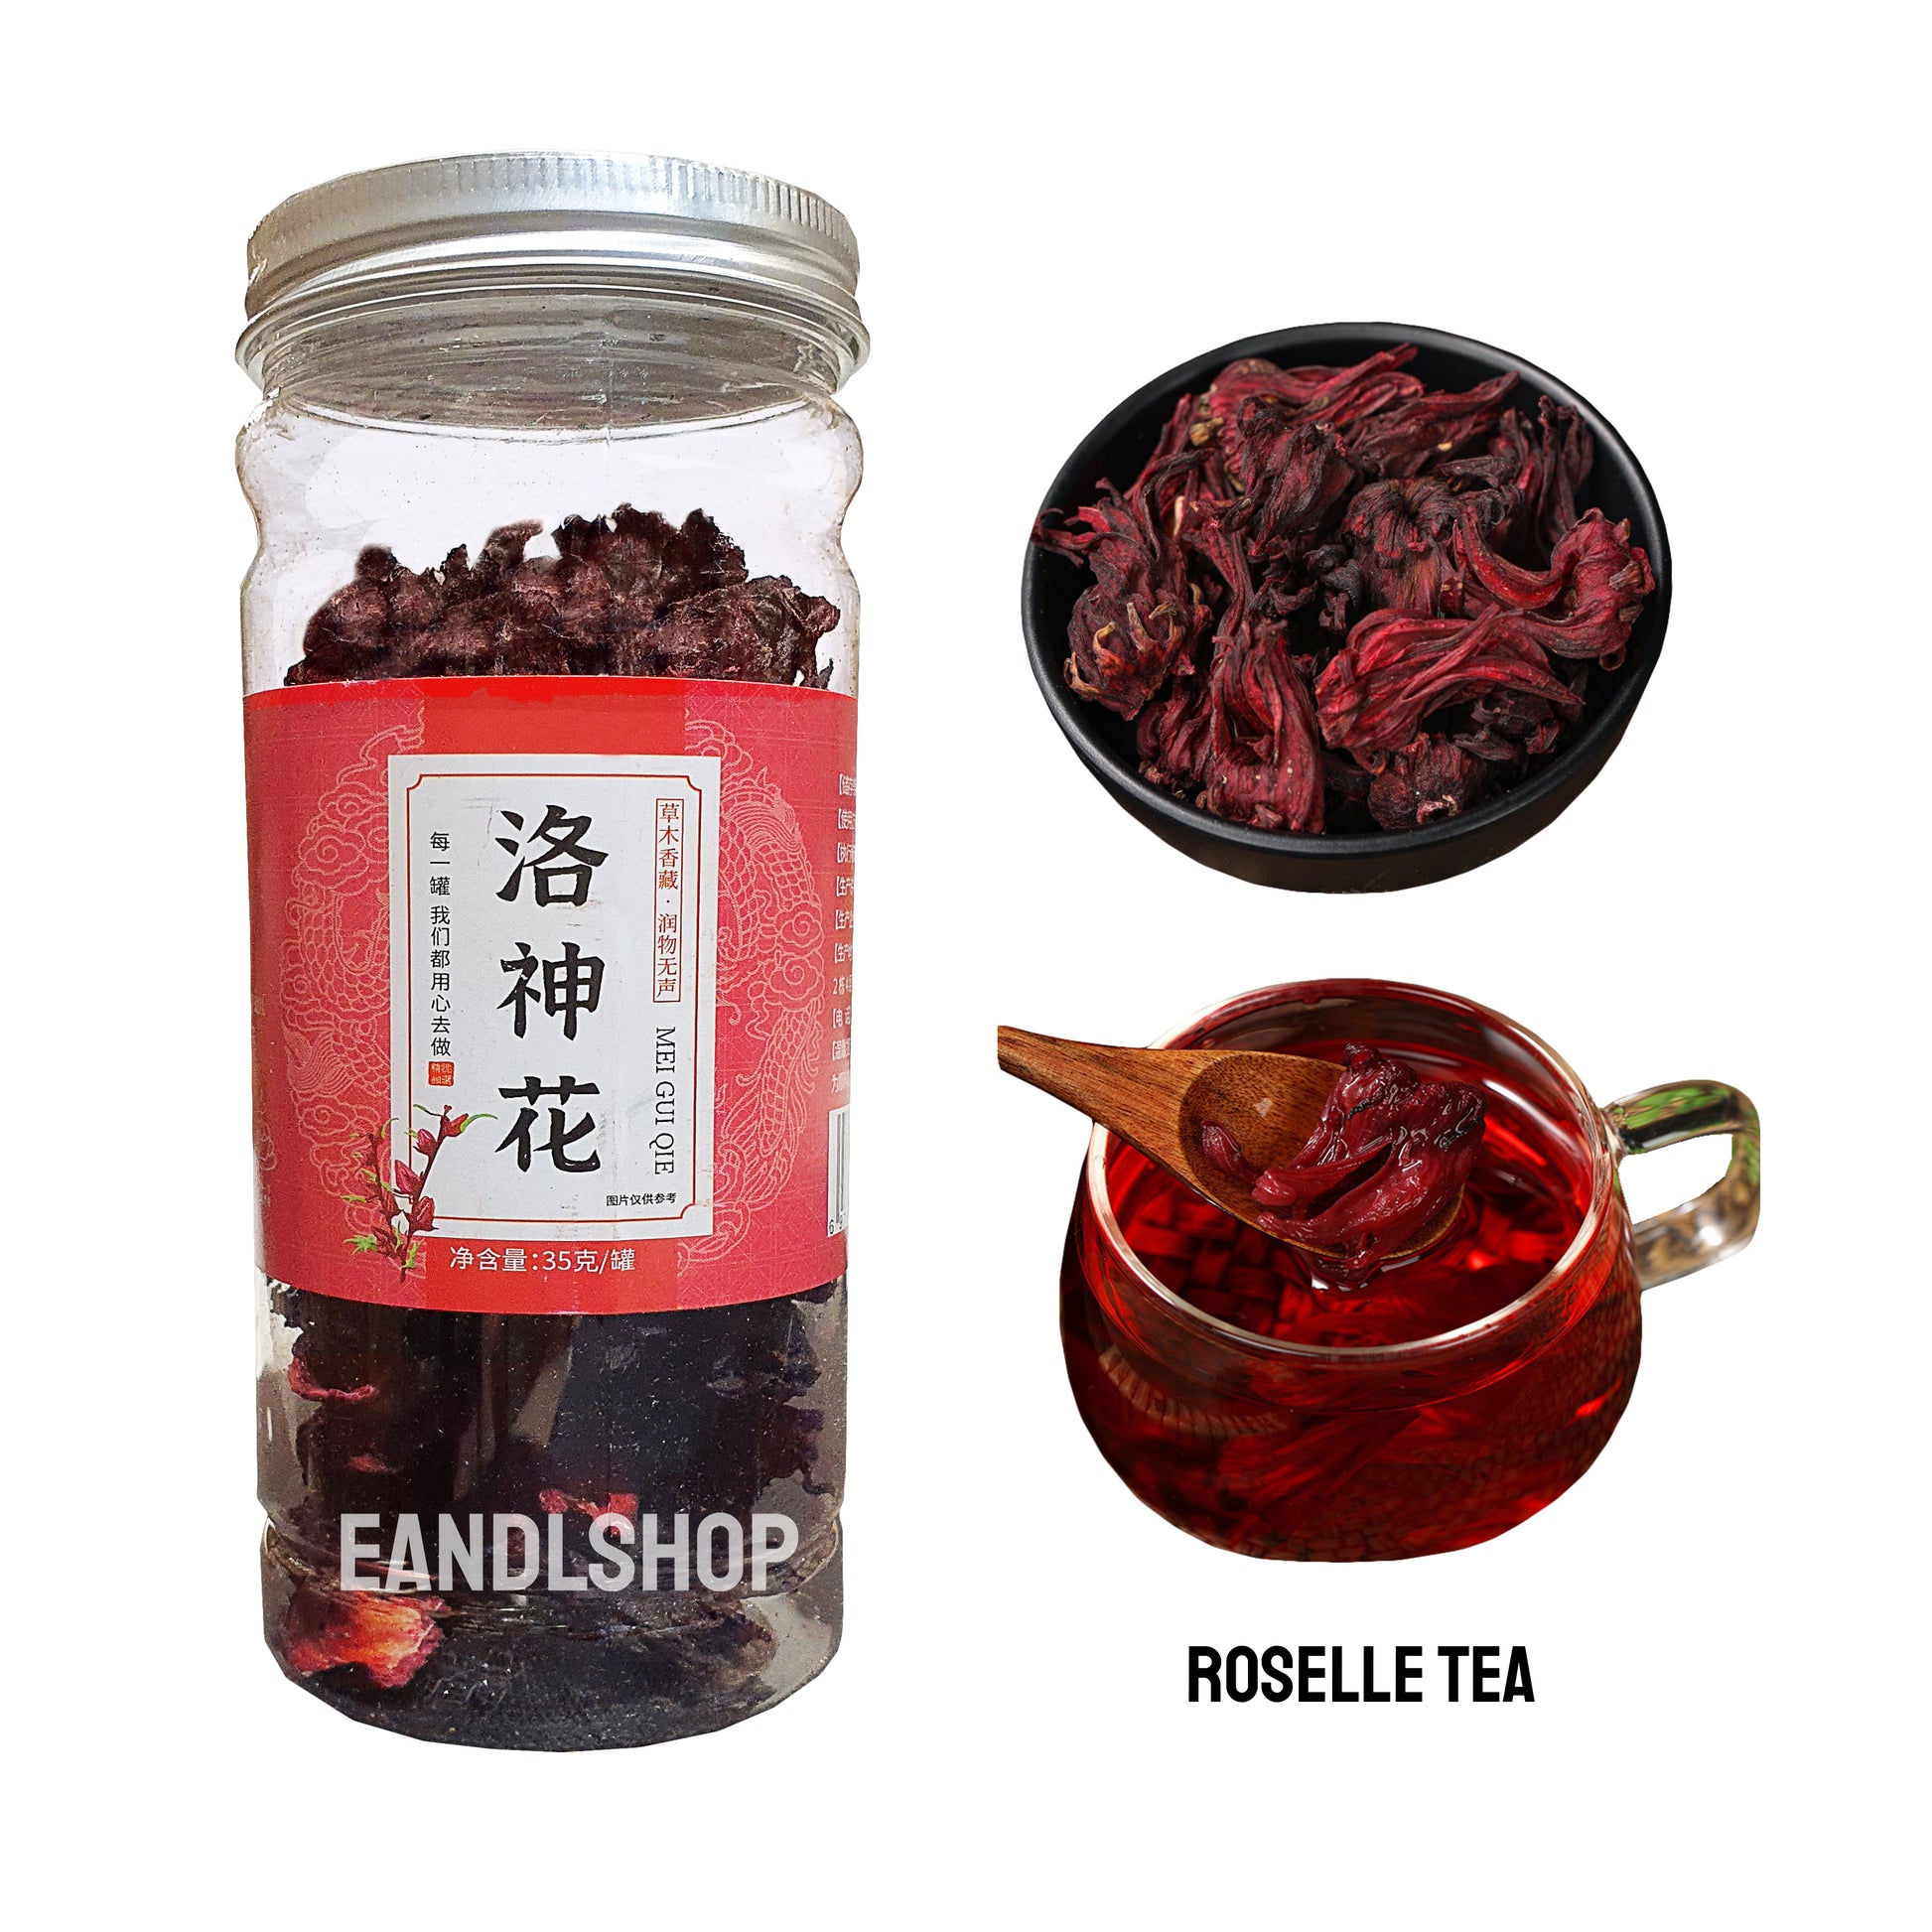 Roselle Tea. Old-school biscuits, modern snacks (chips, crackers), cakes, gummies, plums, dried fruits, nuts, herbal tea – available at www.EANDLSHOP.com